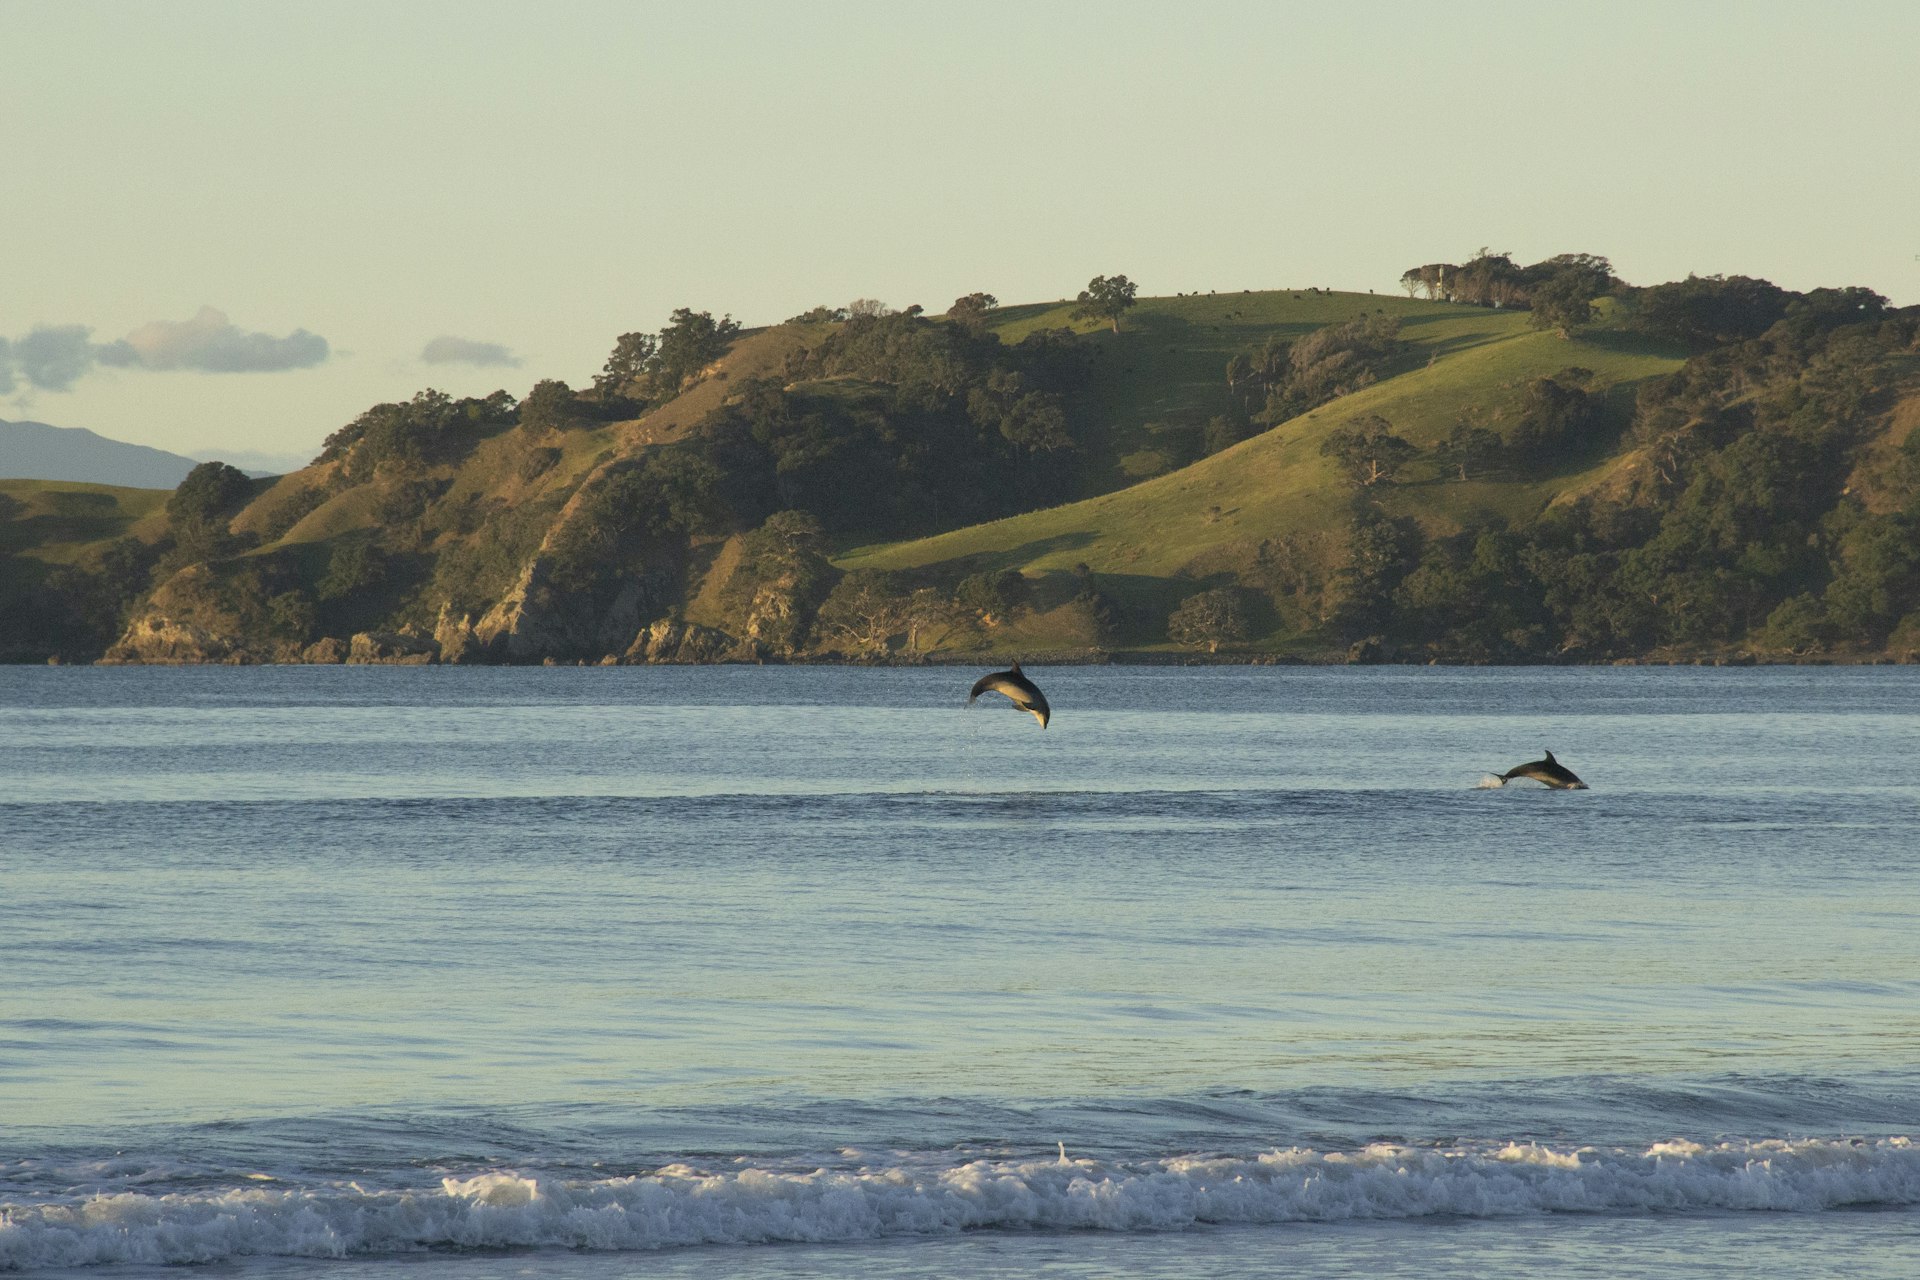 A porpoise jumps out of the water at Onetangi Beach.